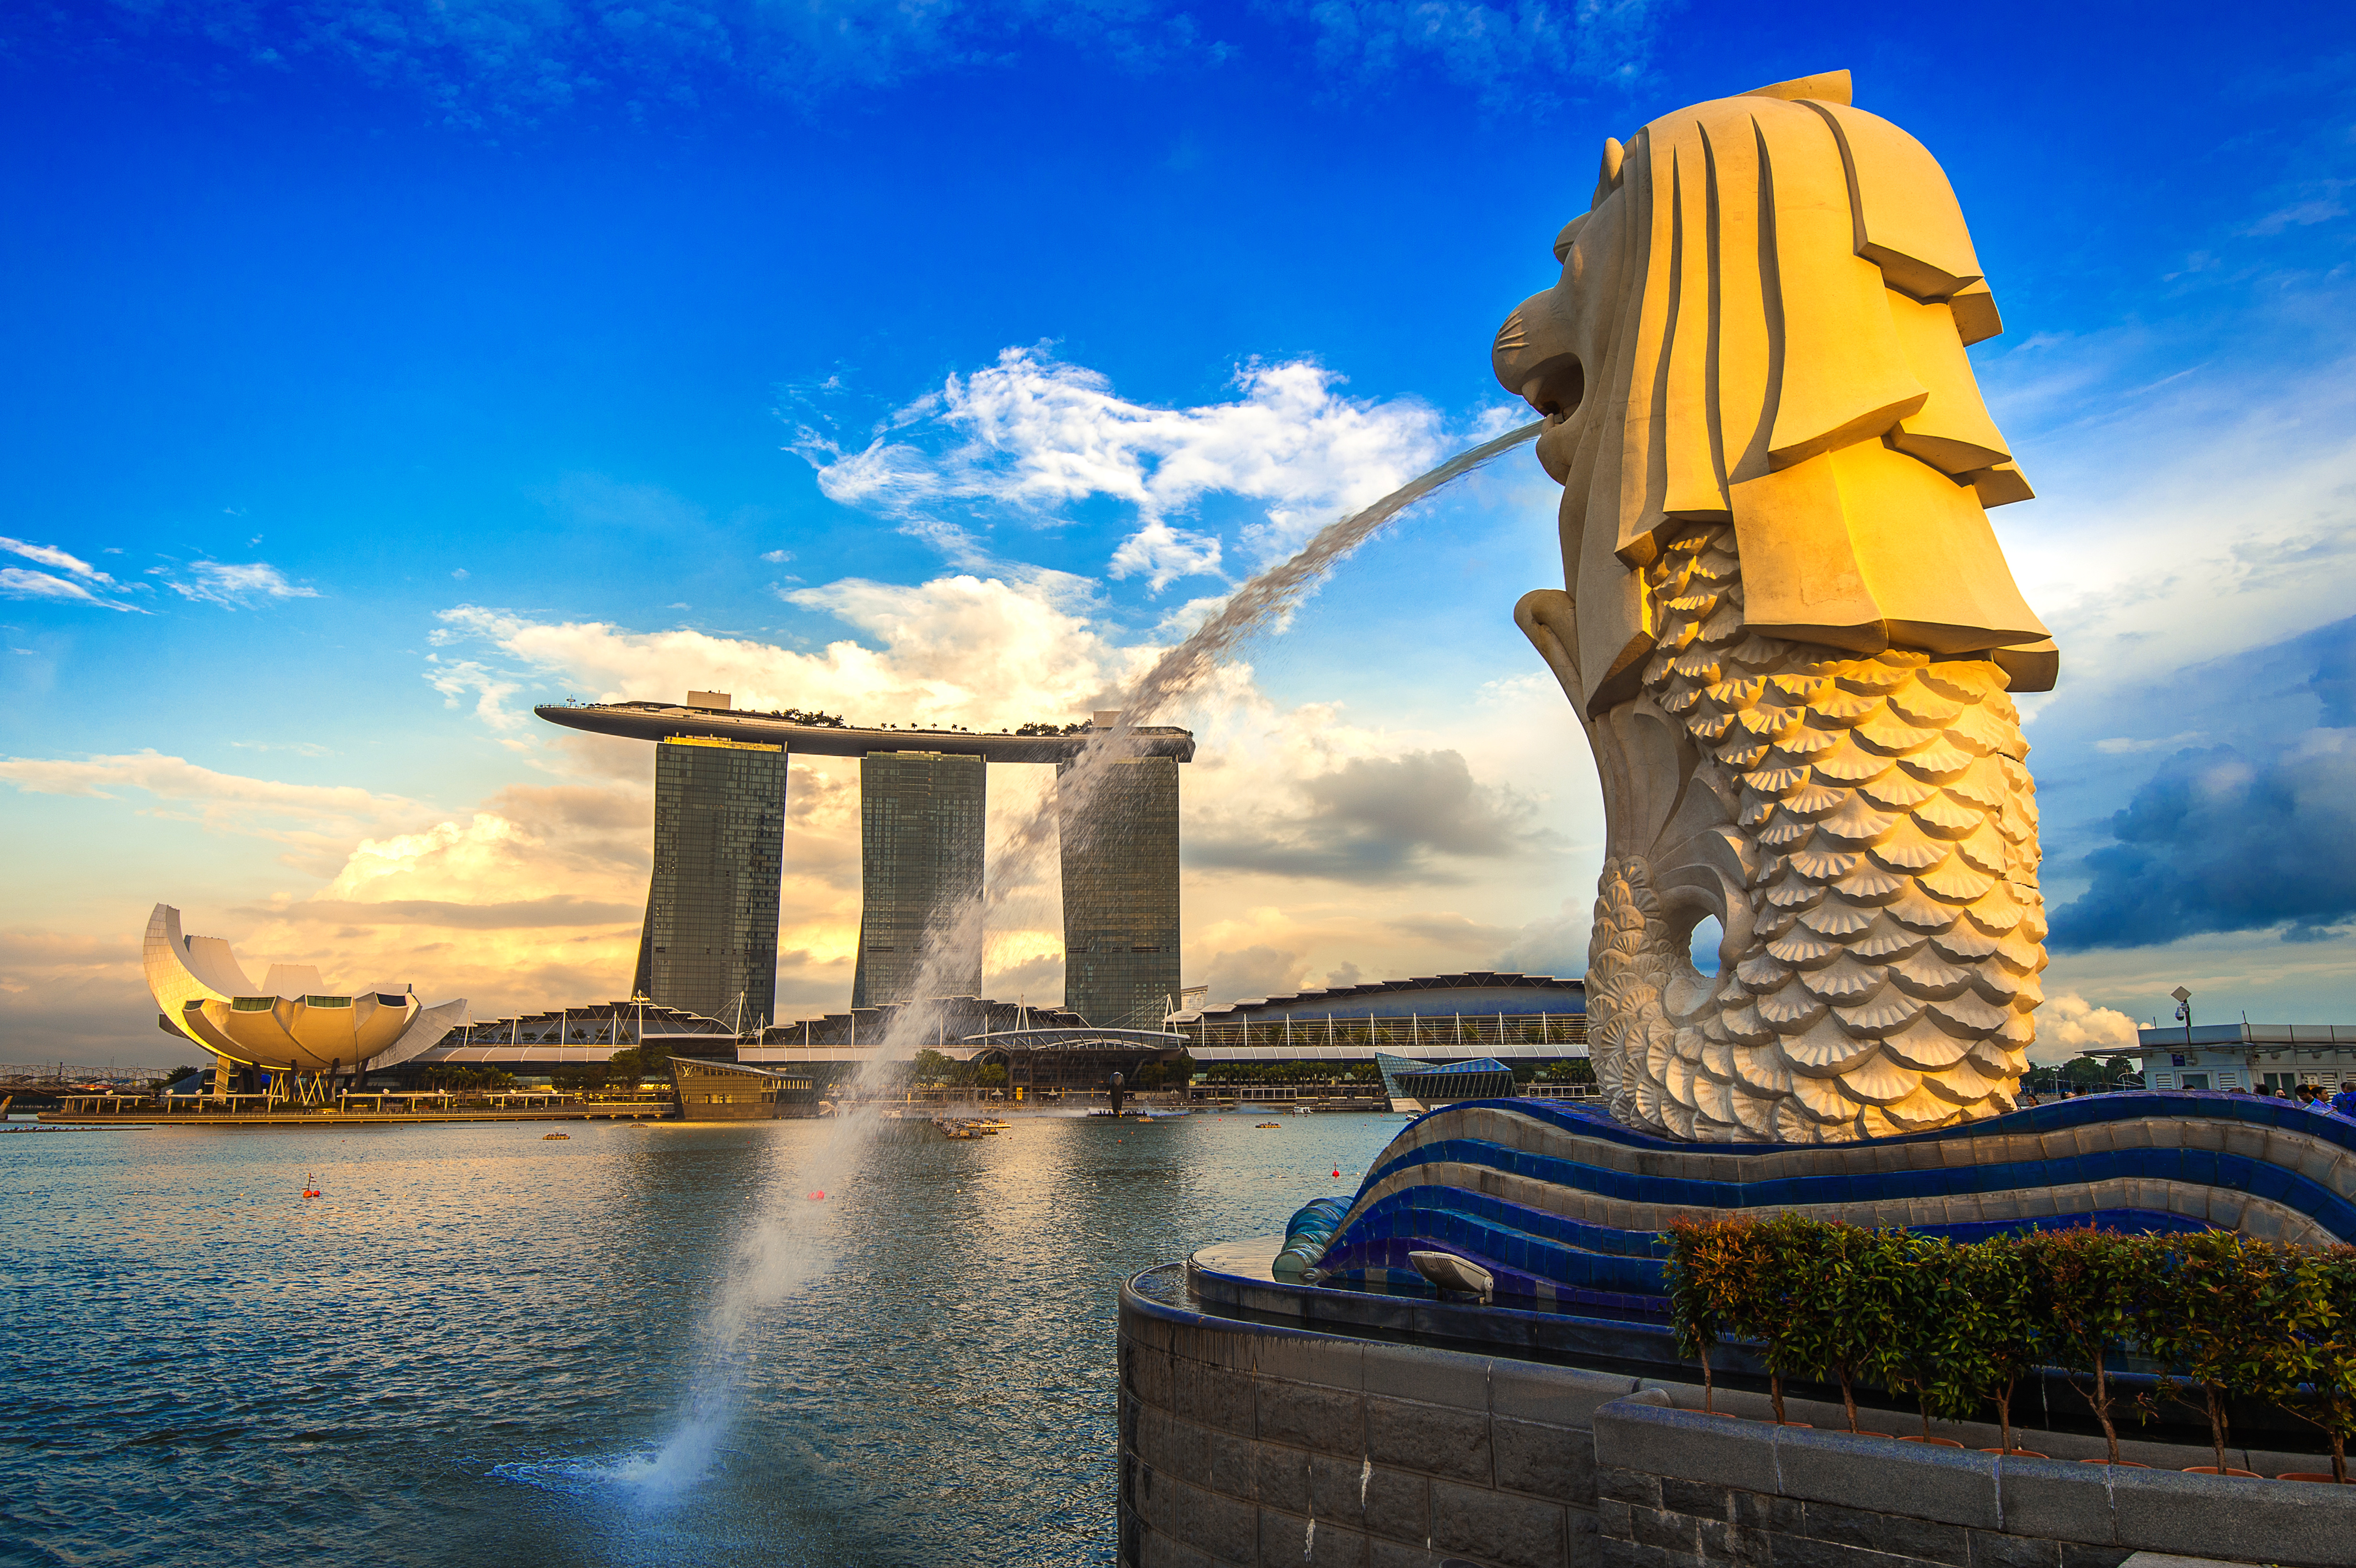 Singapore's famous hotel Marina bay sands and Merlion statues. 